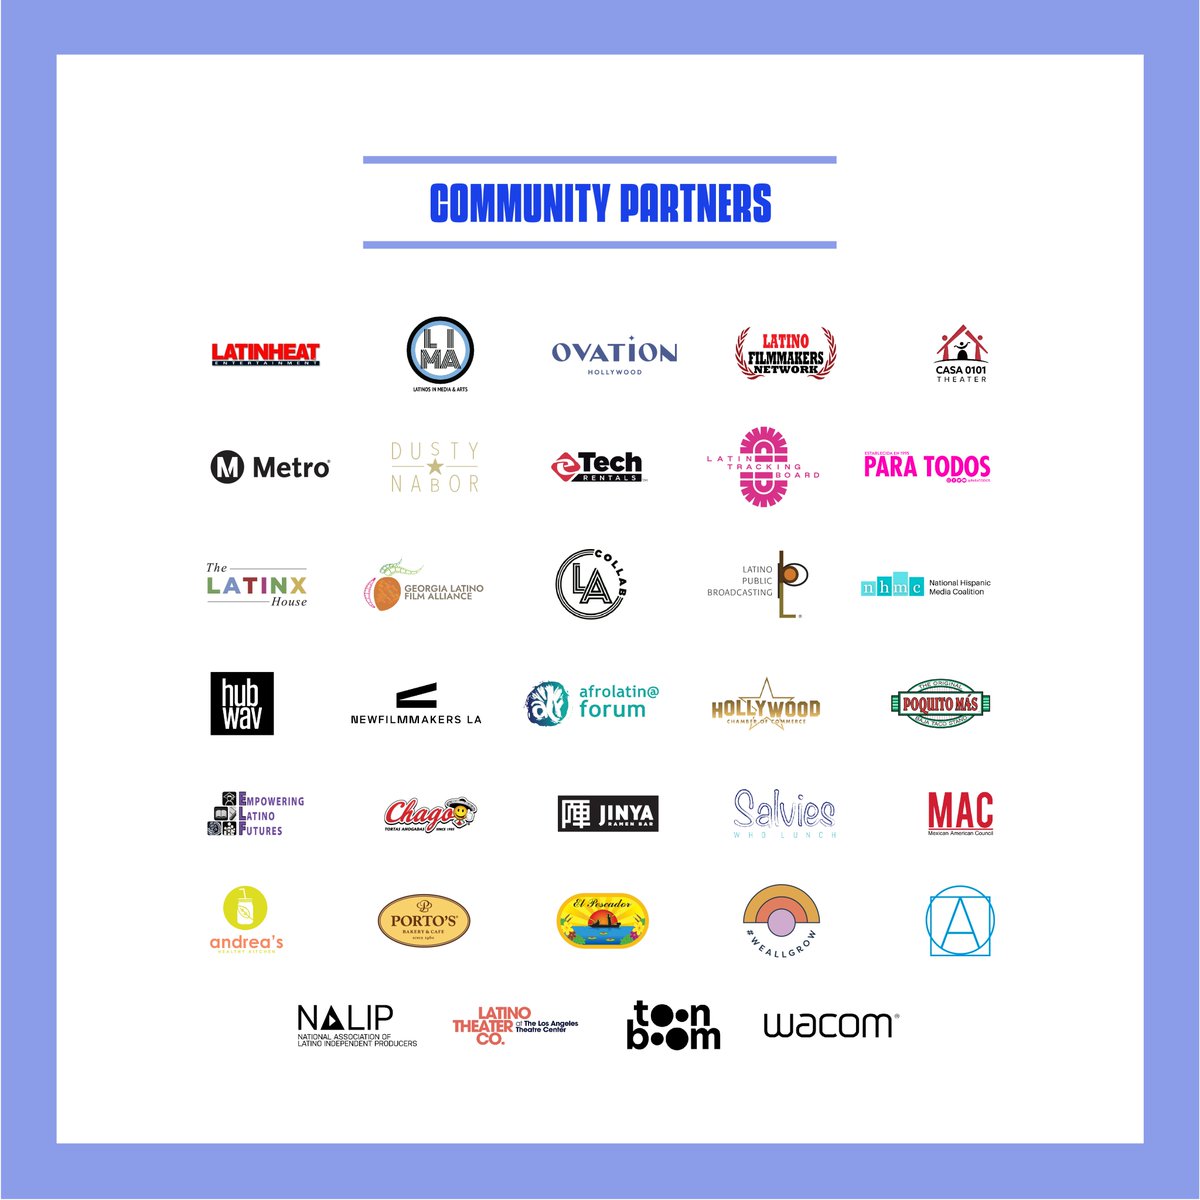 We’re fortunate to have so many organizations support #LALIFF2023. Thank you for being our Community Partners!